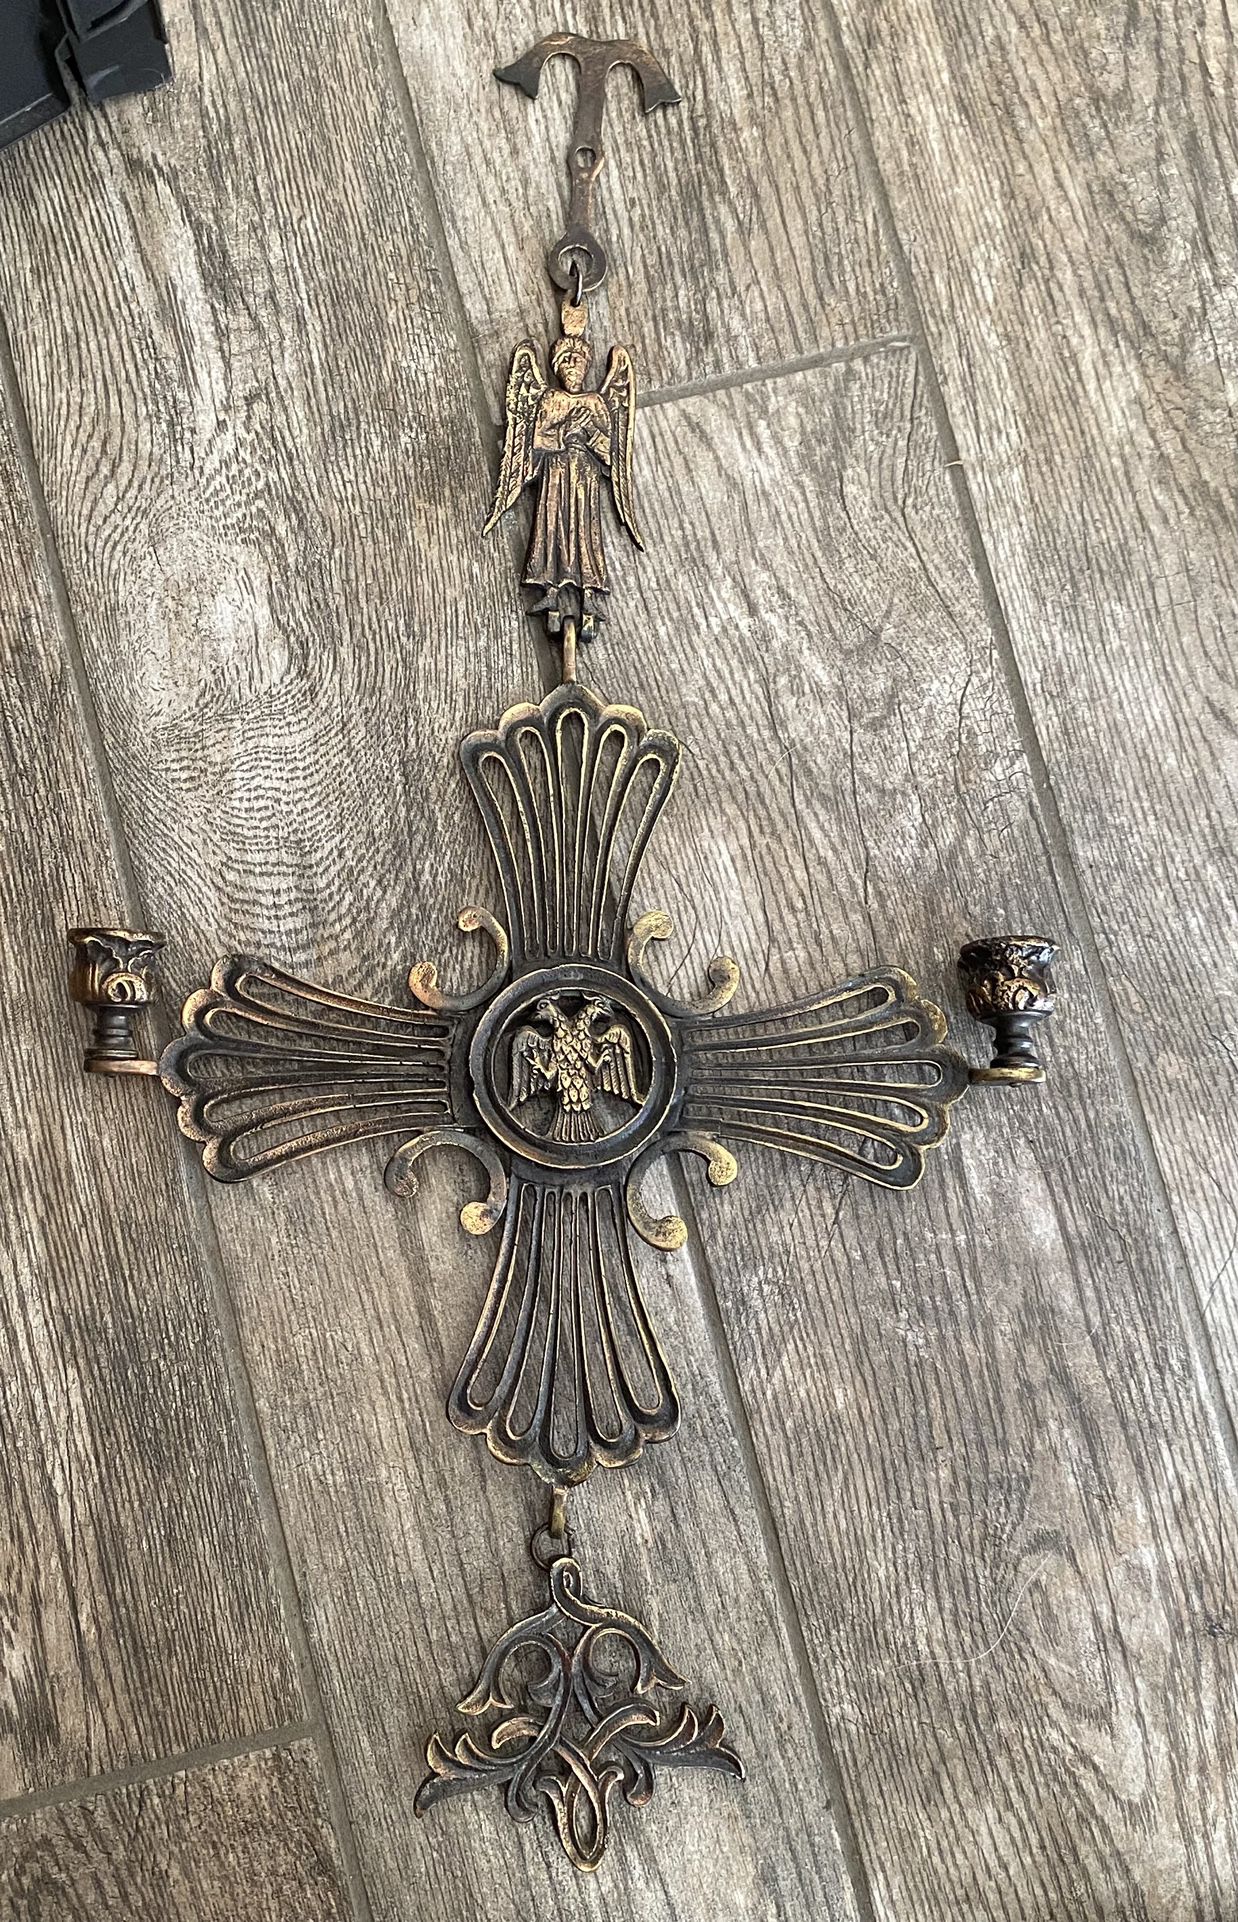 Vintage Brass Byzantine Cross Wall Hanging Sculpture Candle Holder 2 Headed Eagles